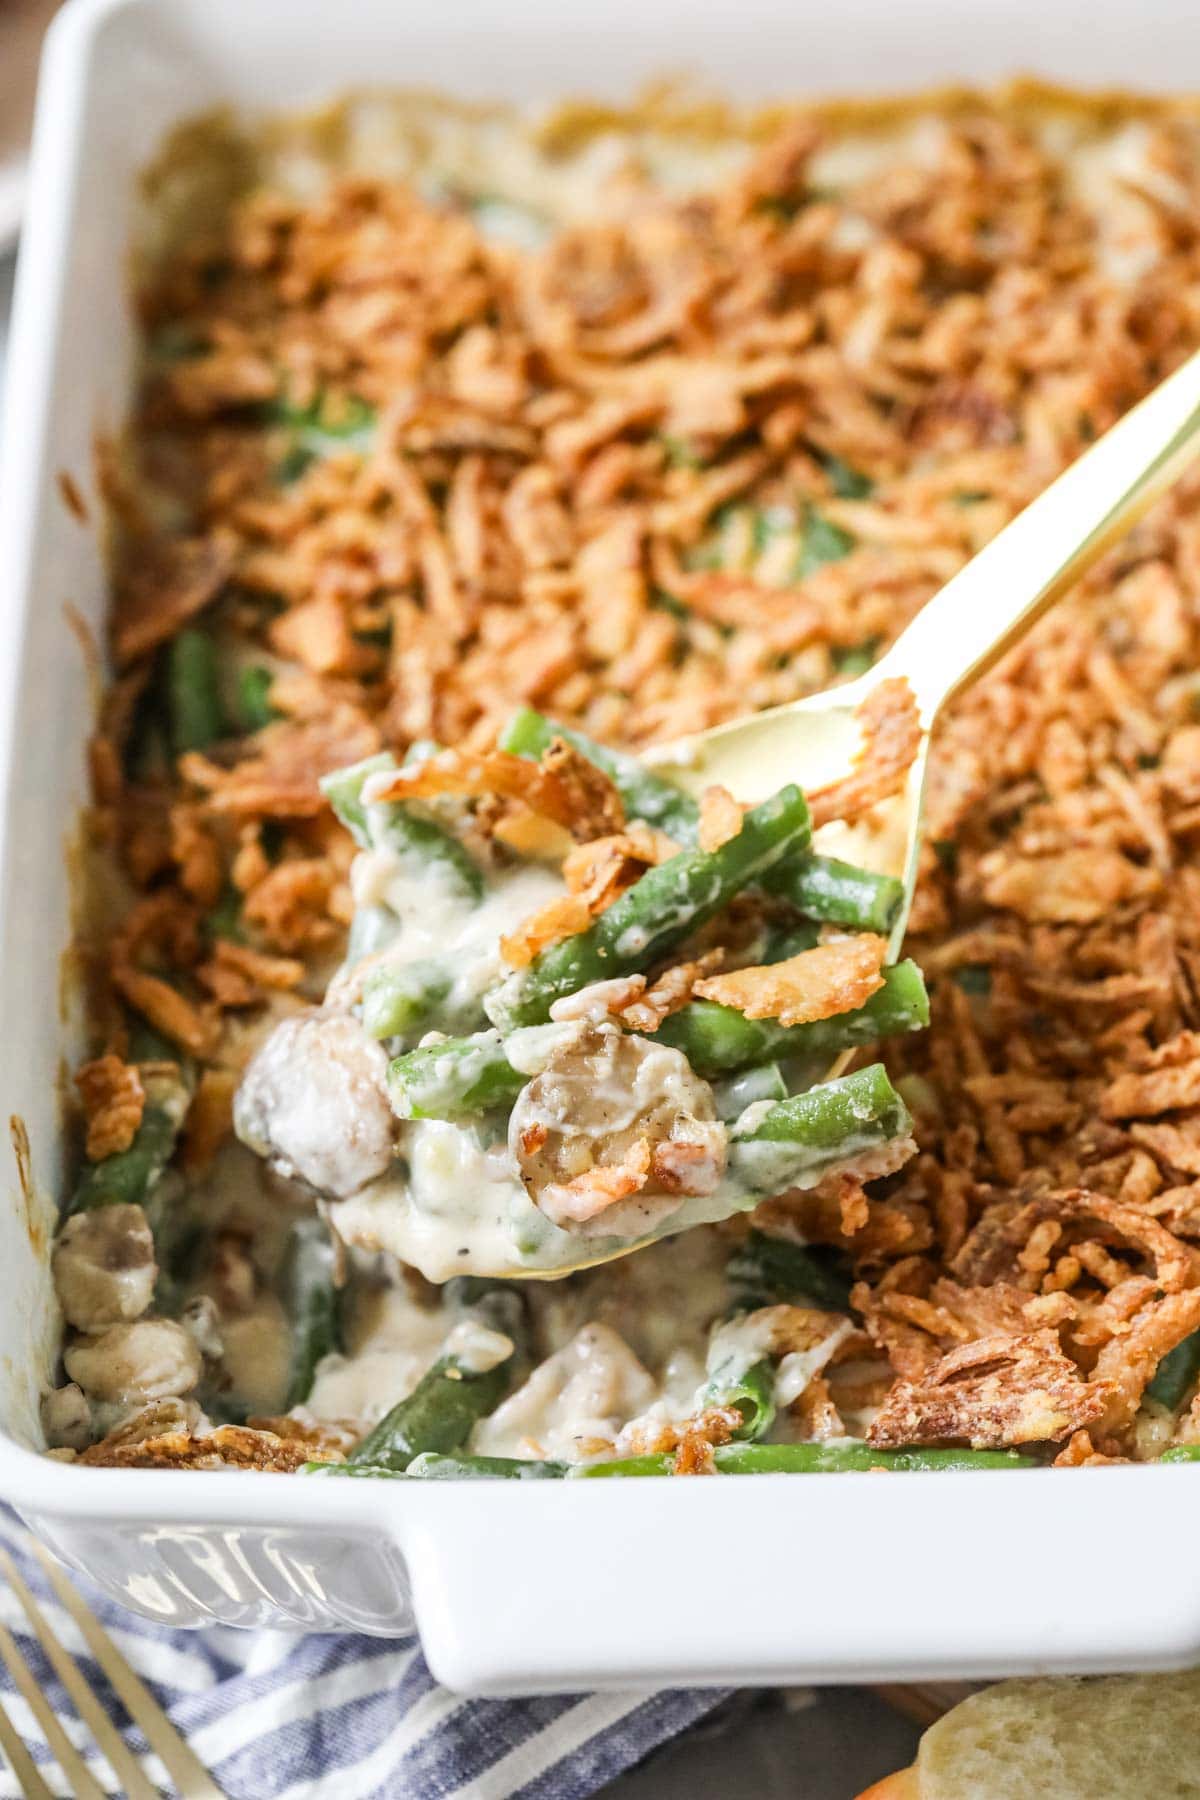 Green bean casserole being scooped out of a casserole dish with a gold spoon.